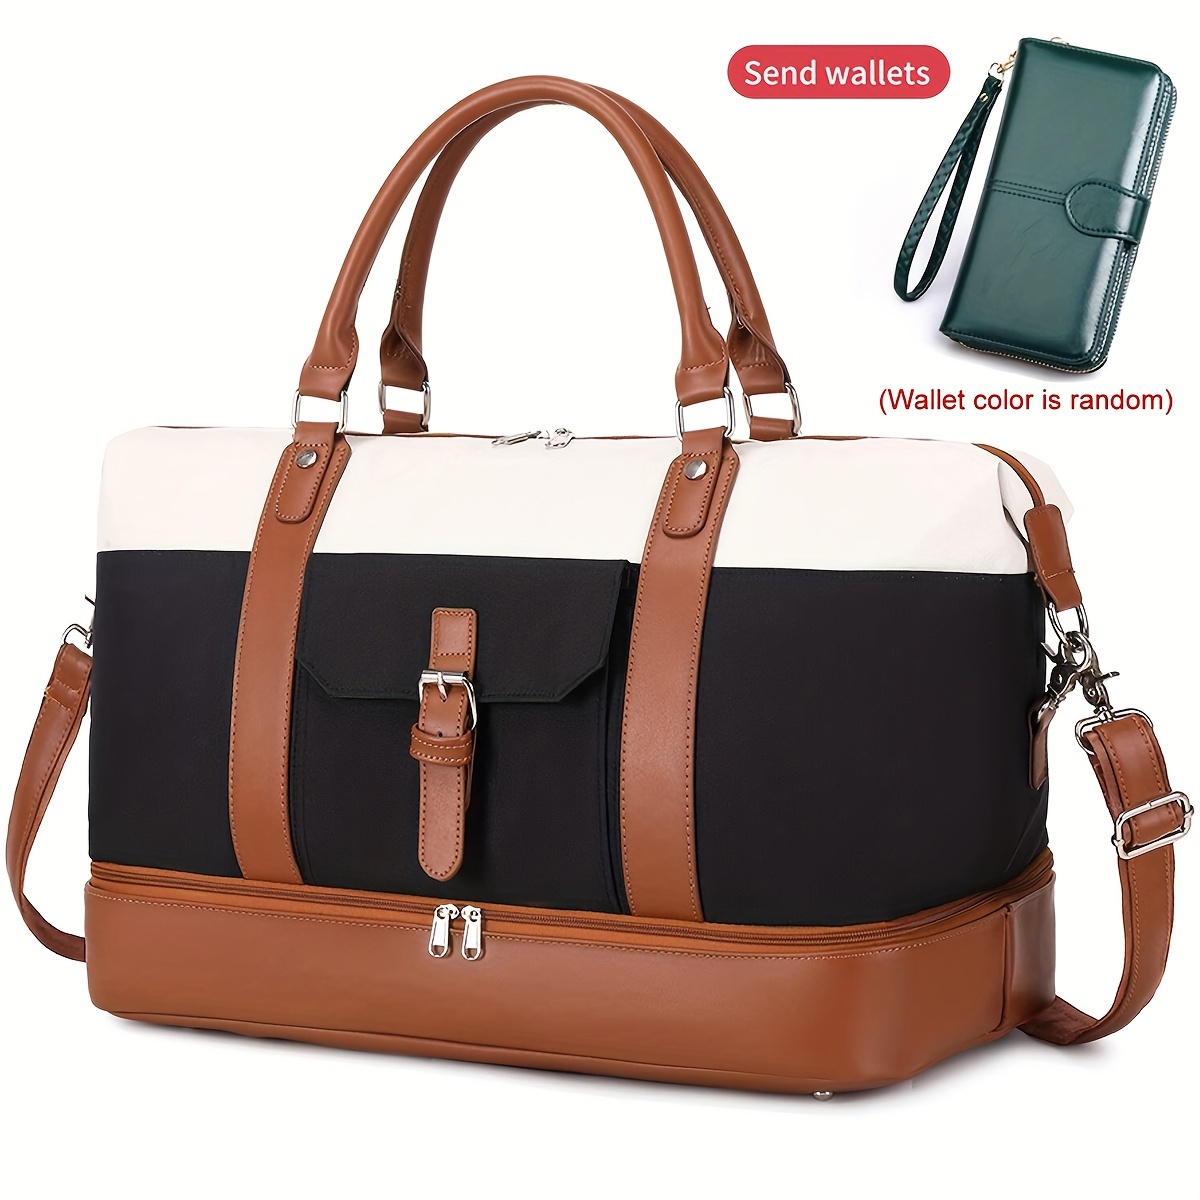  Travel Bag with Shoes Compartment,Weekender Bags for